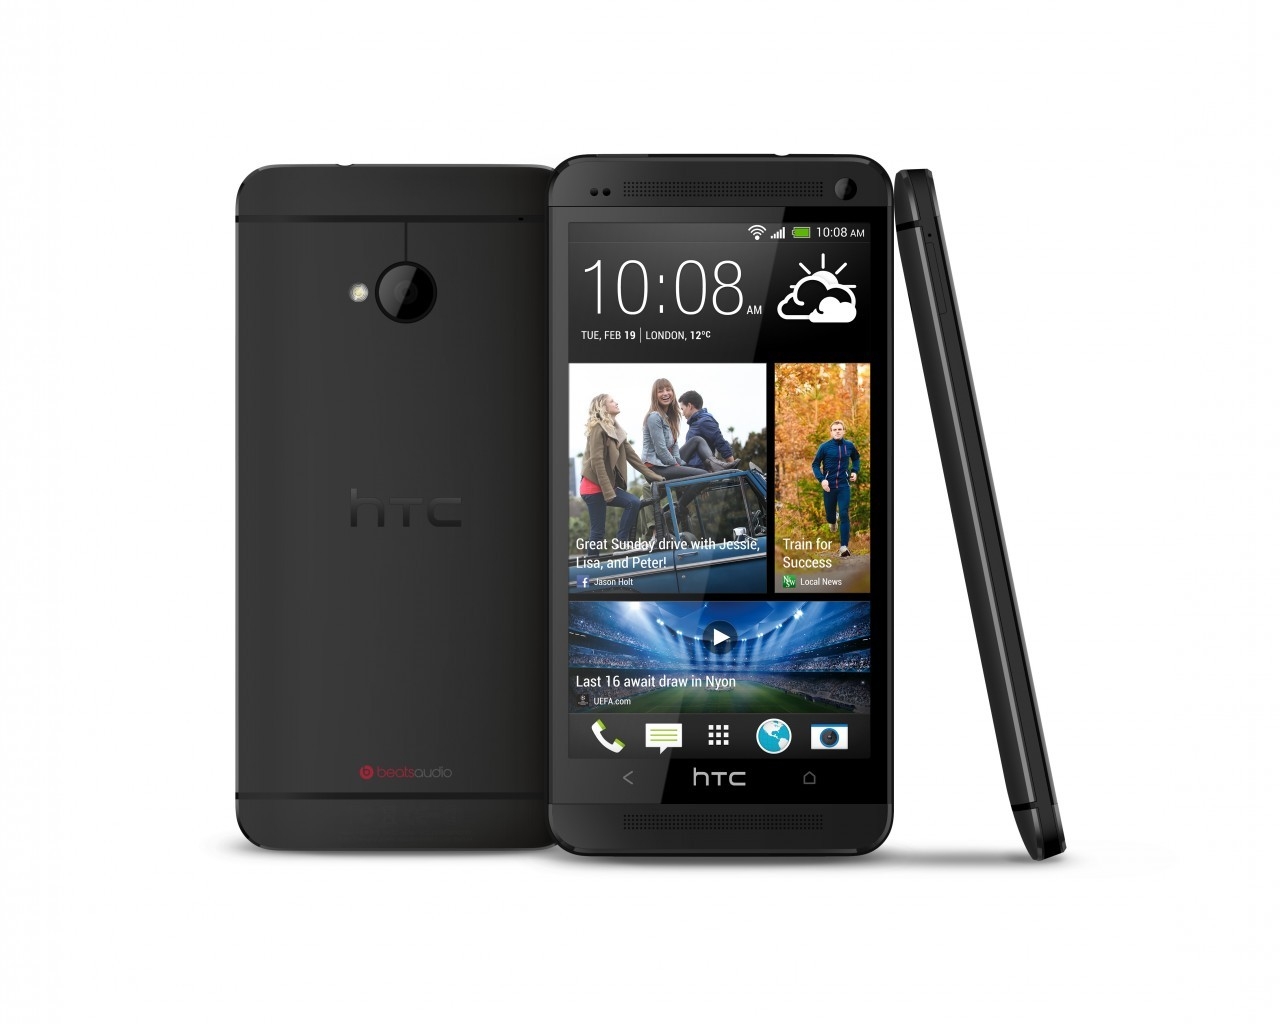 New HTC One for 1280 x 1024 resolution